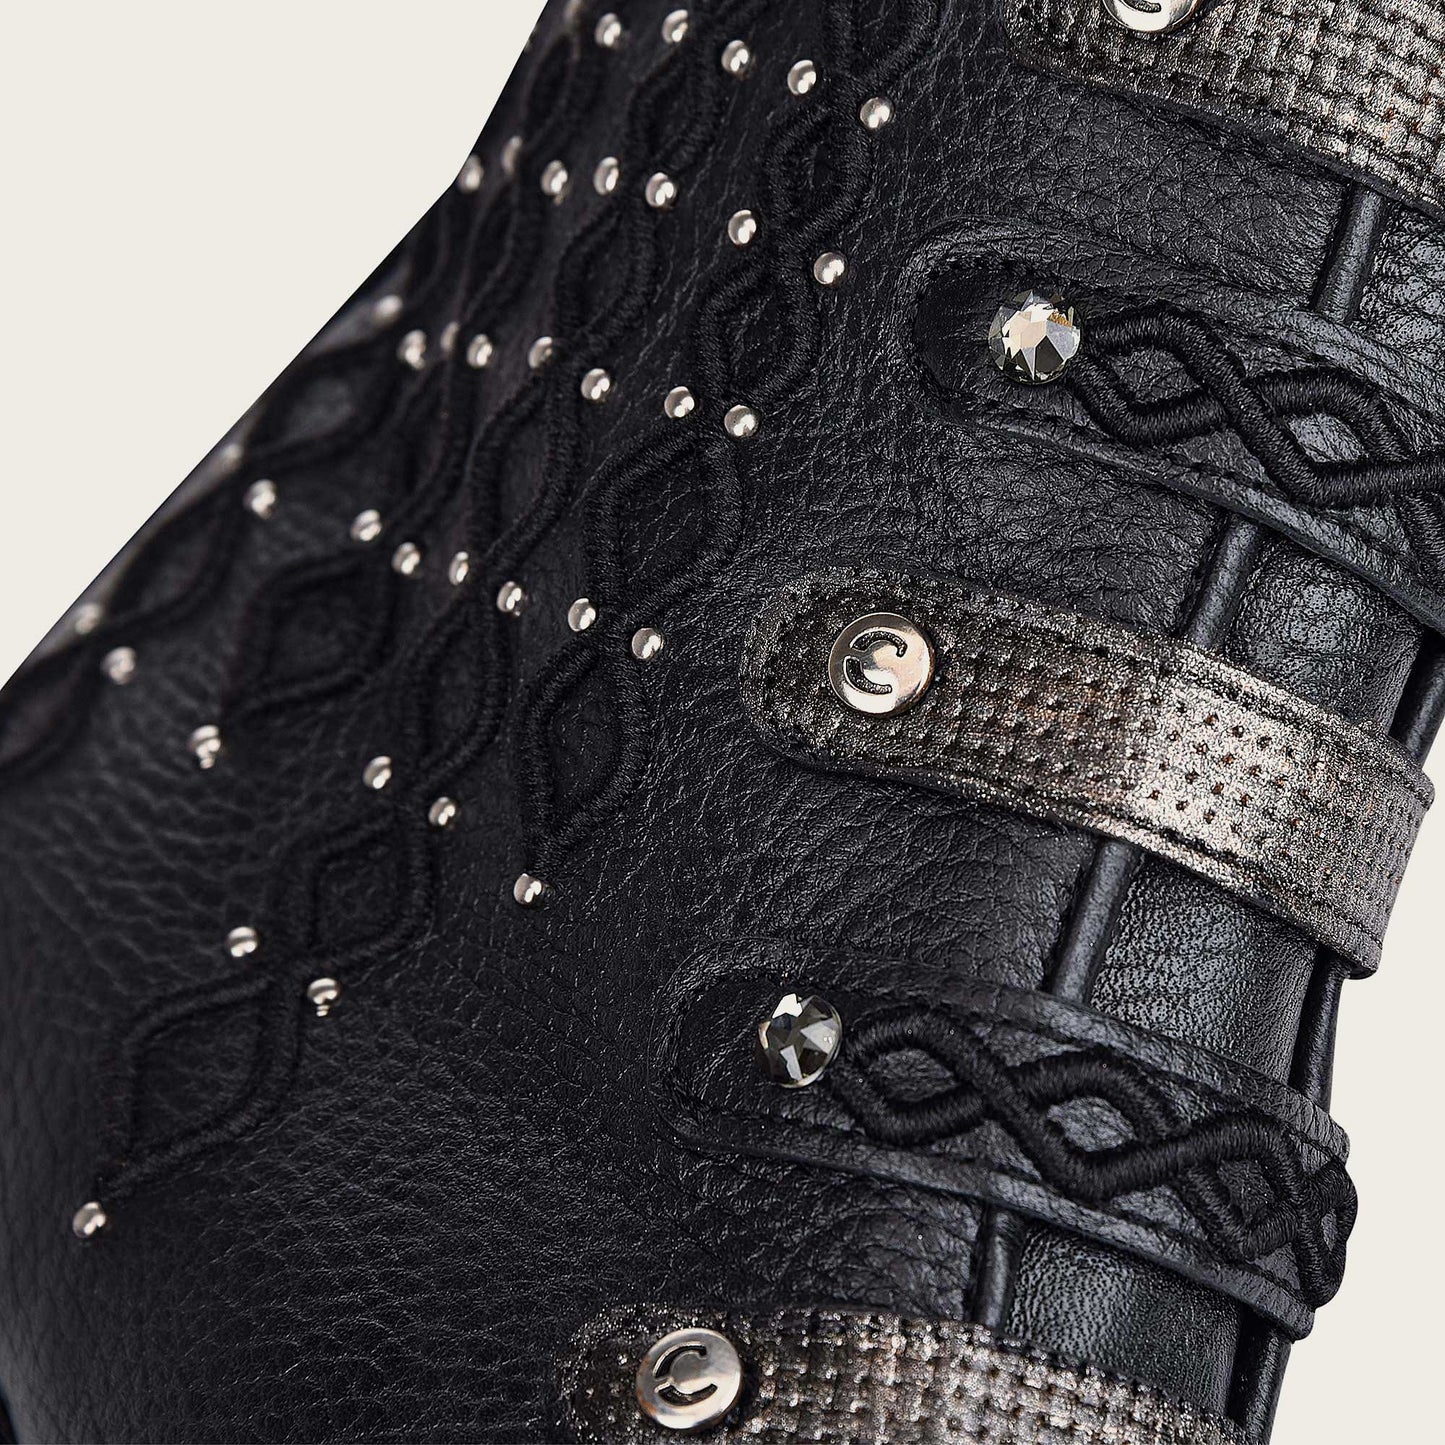 An image of a black leather bootie with intricate embroidery details and sparkling Austrian crystals